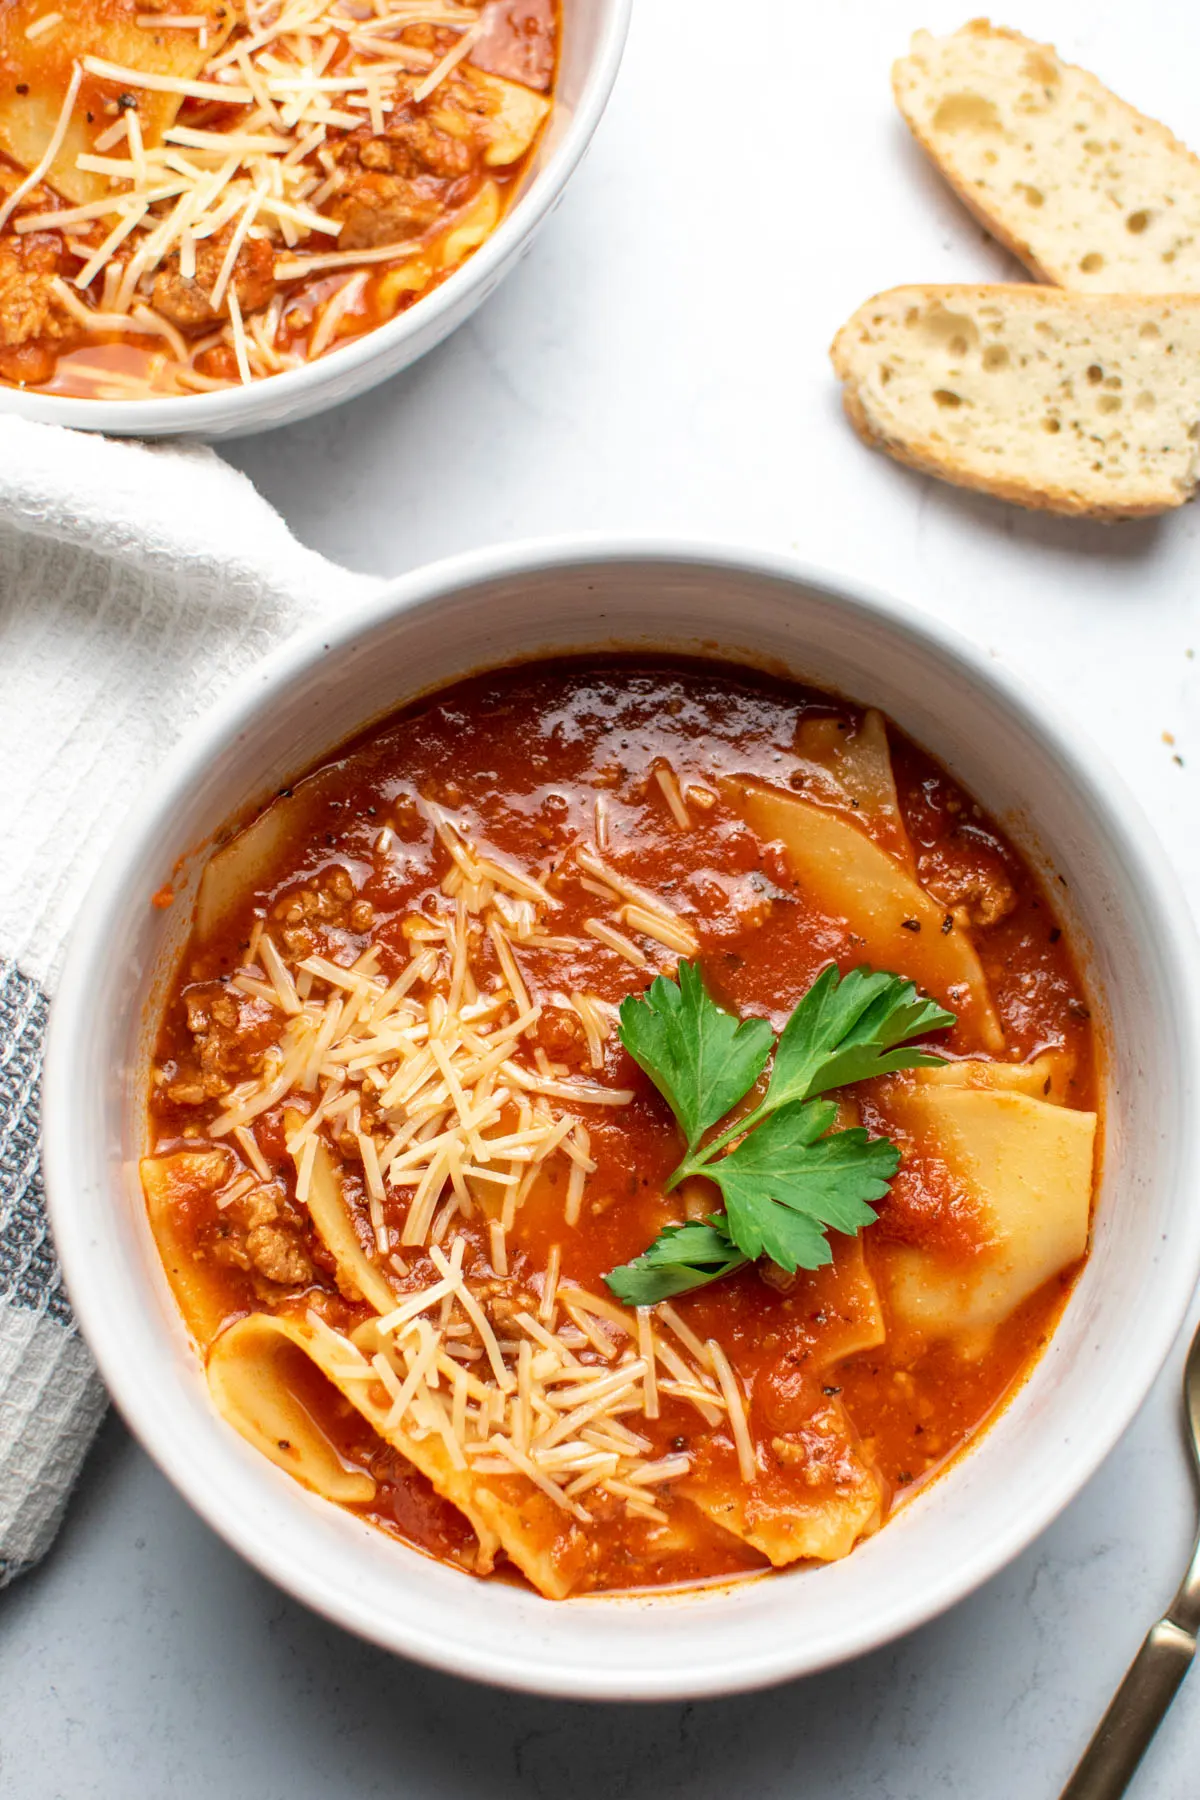 Bowls of lasagna soup on countertop with slices of bread and kitchen towel nearby.